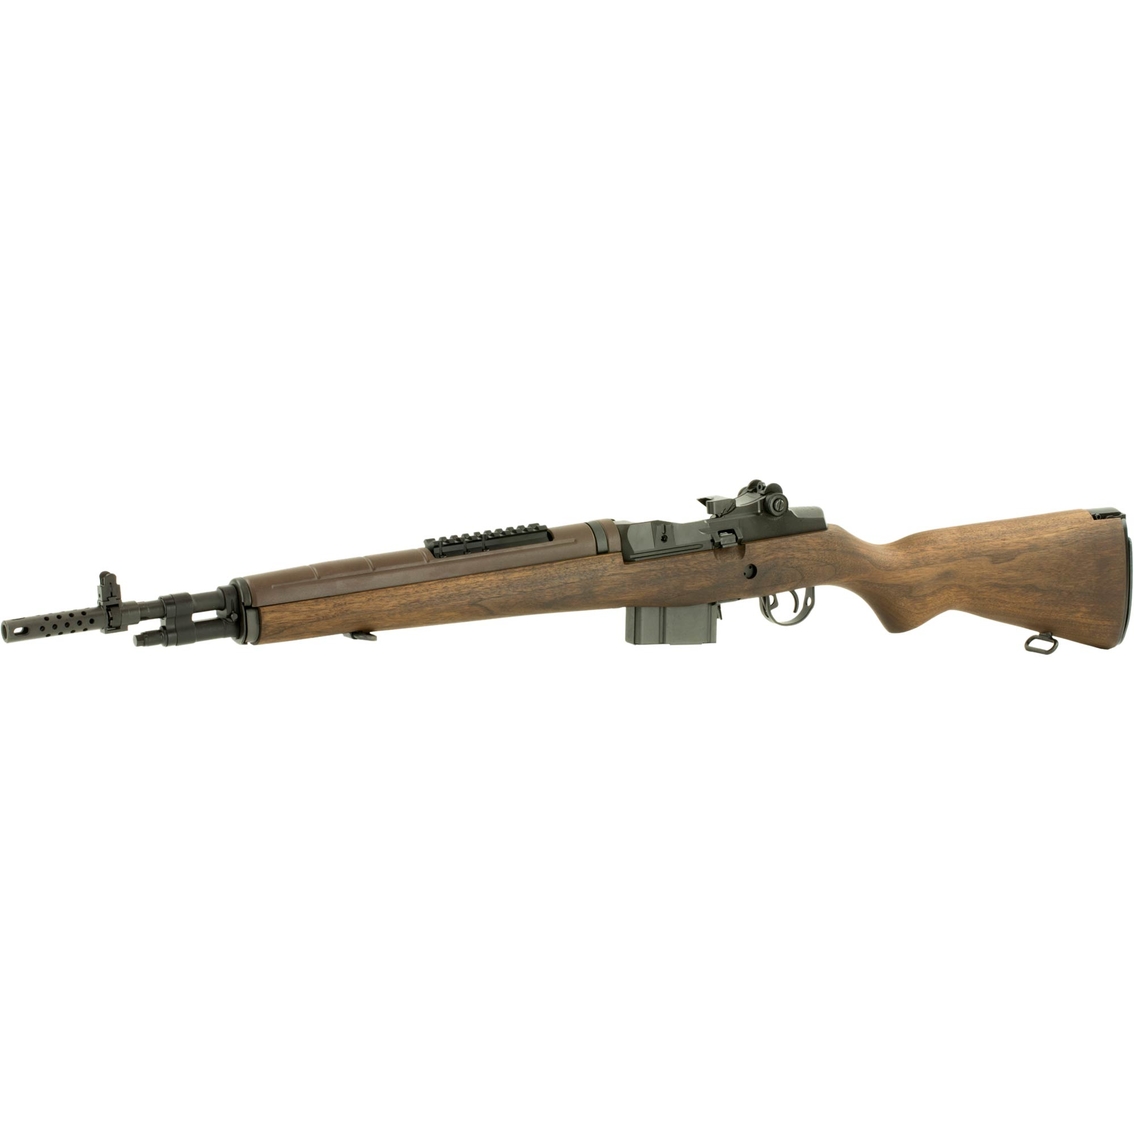 Springfield M1A Scout Squad 308 Win 18 in. Barrel 10 Rnd Rifle Blued - Image 3 of 3